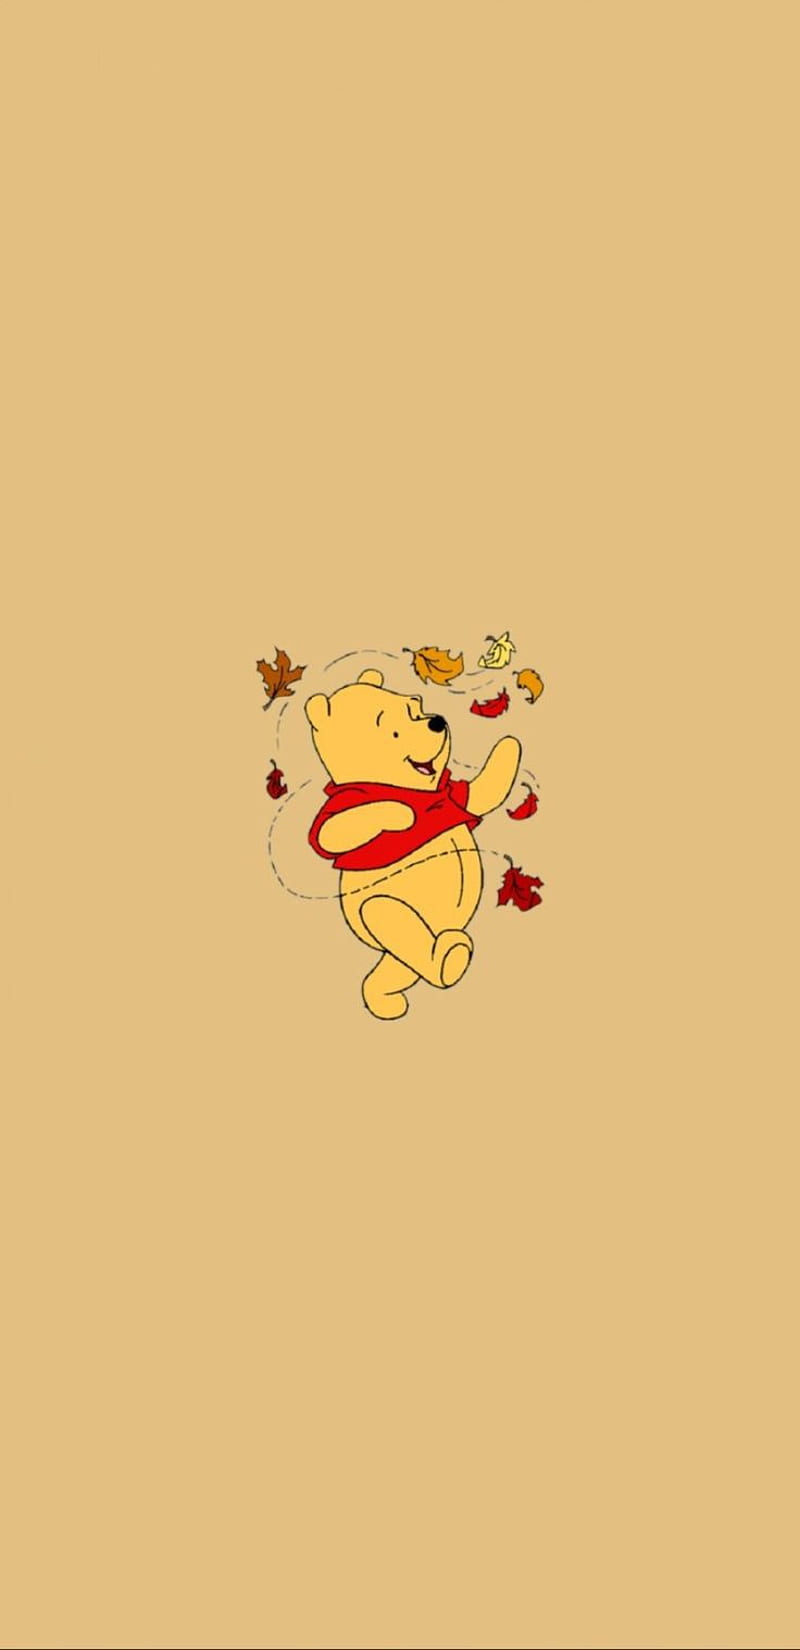 Pin by mieseyo on Aesthetic Background Wallpaper  Winnie the pooh  drawing Winnie the pooh pictures Cartoon wallpaper iphone